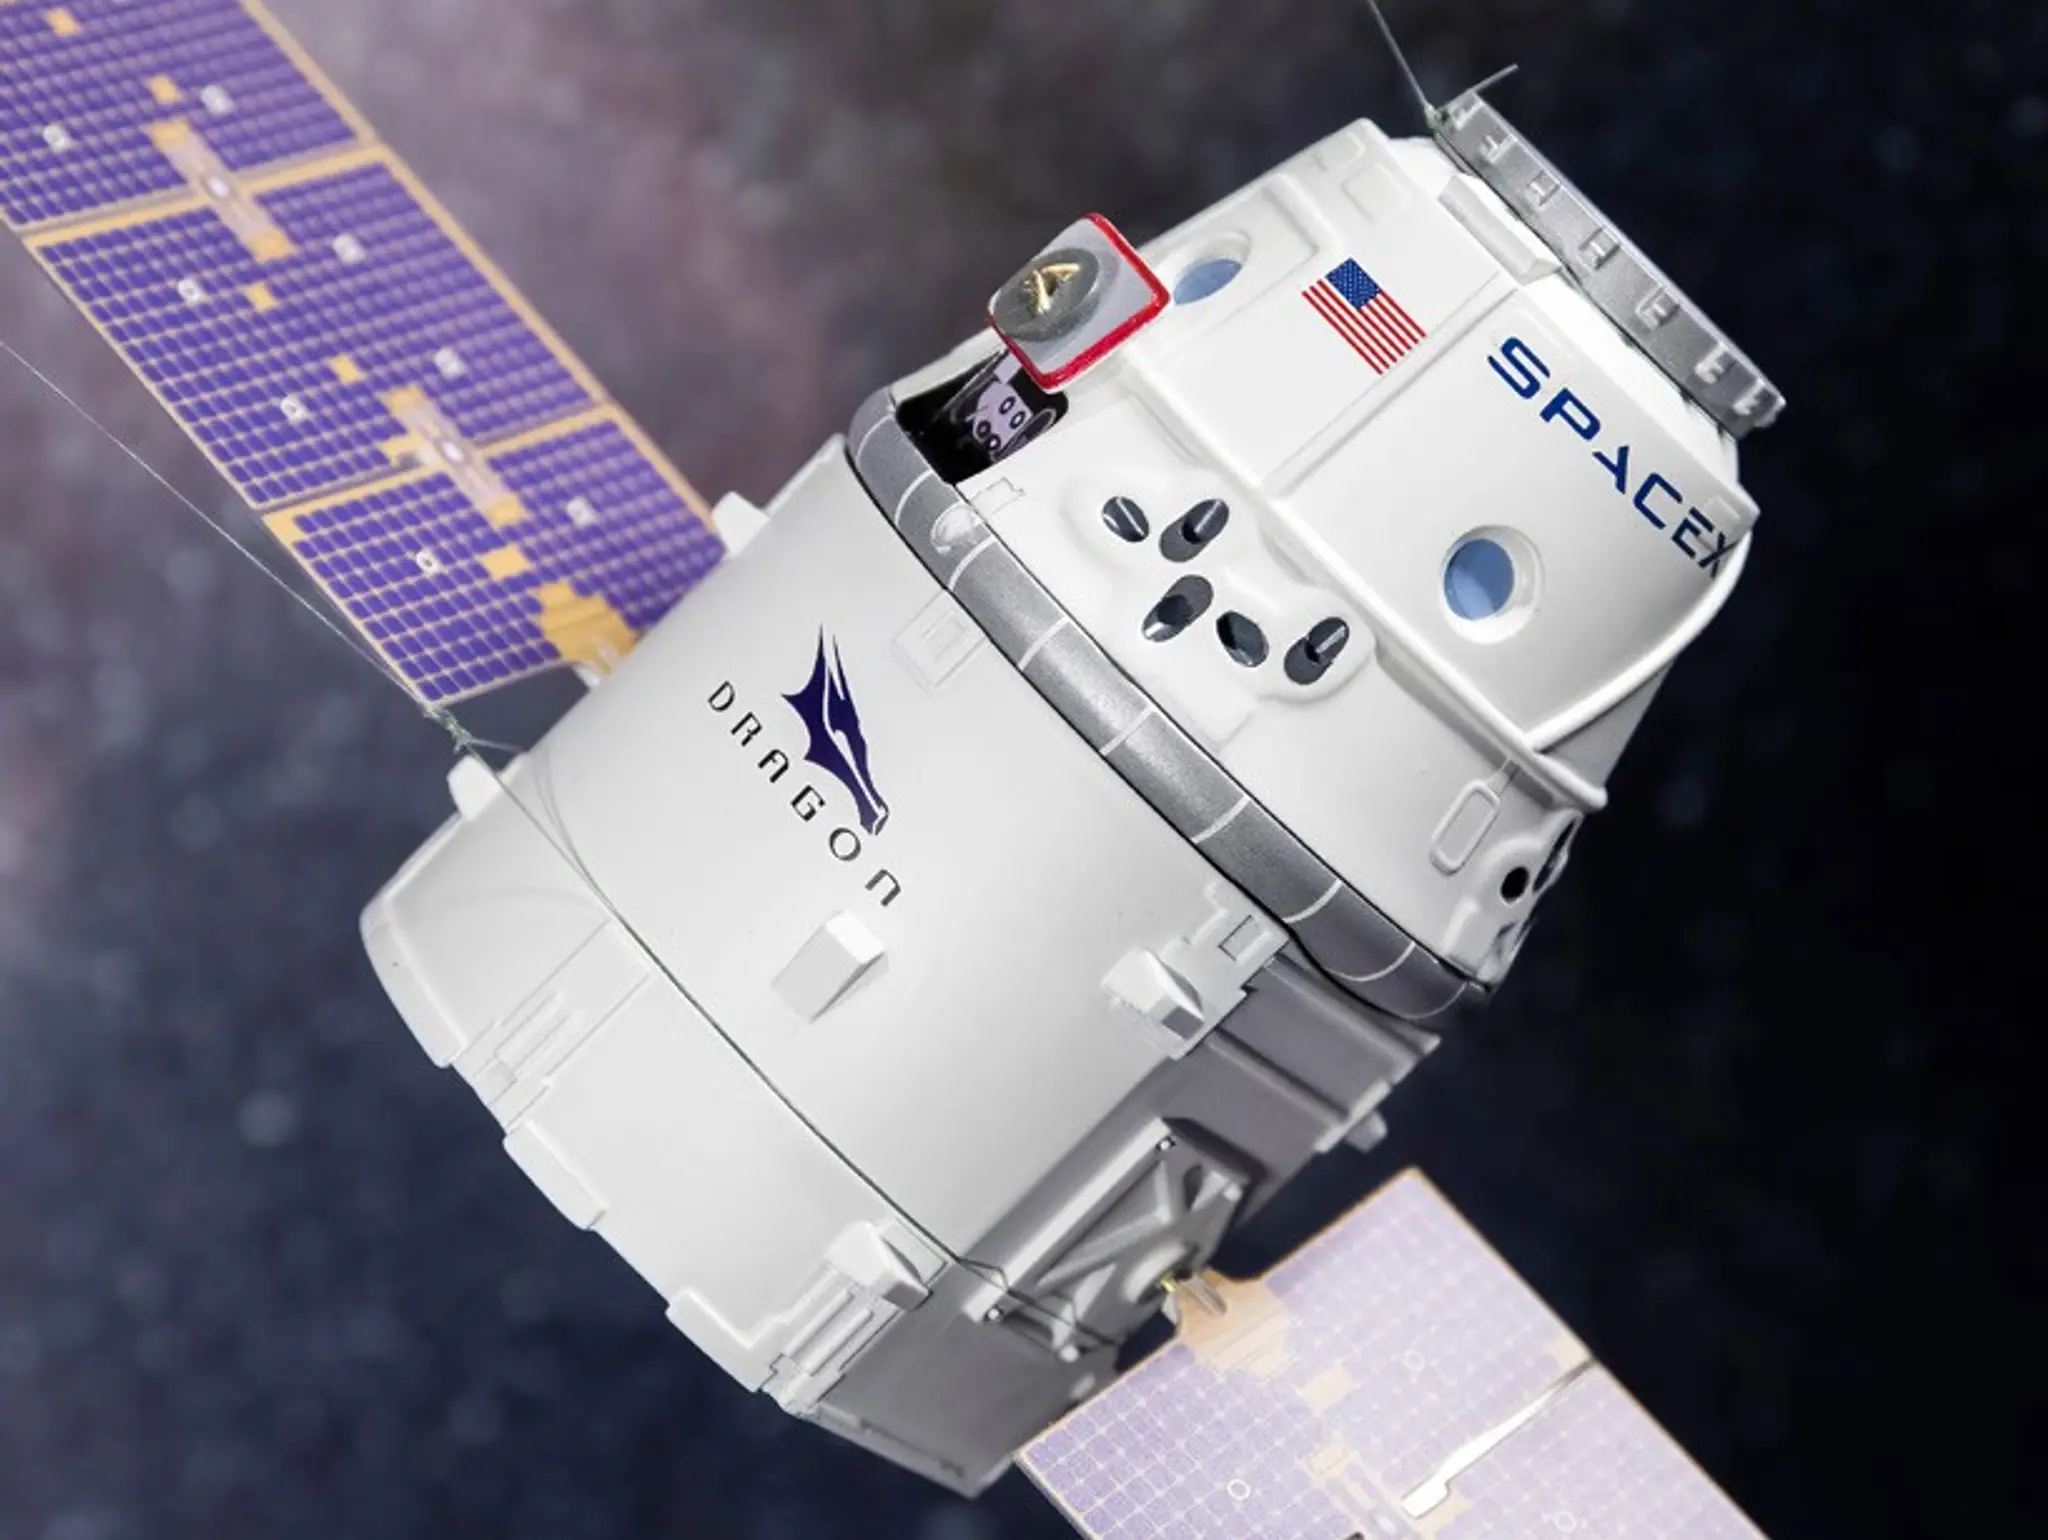 Bristol Myers Squibb works with SpaceX to study biomanufacturing in space